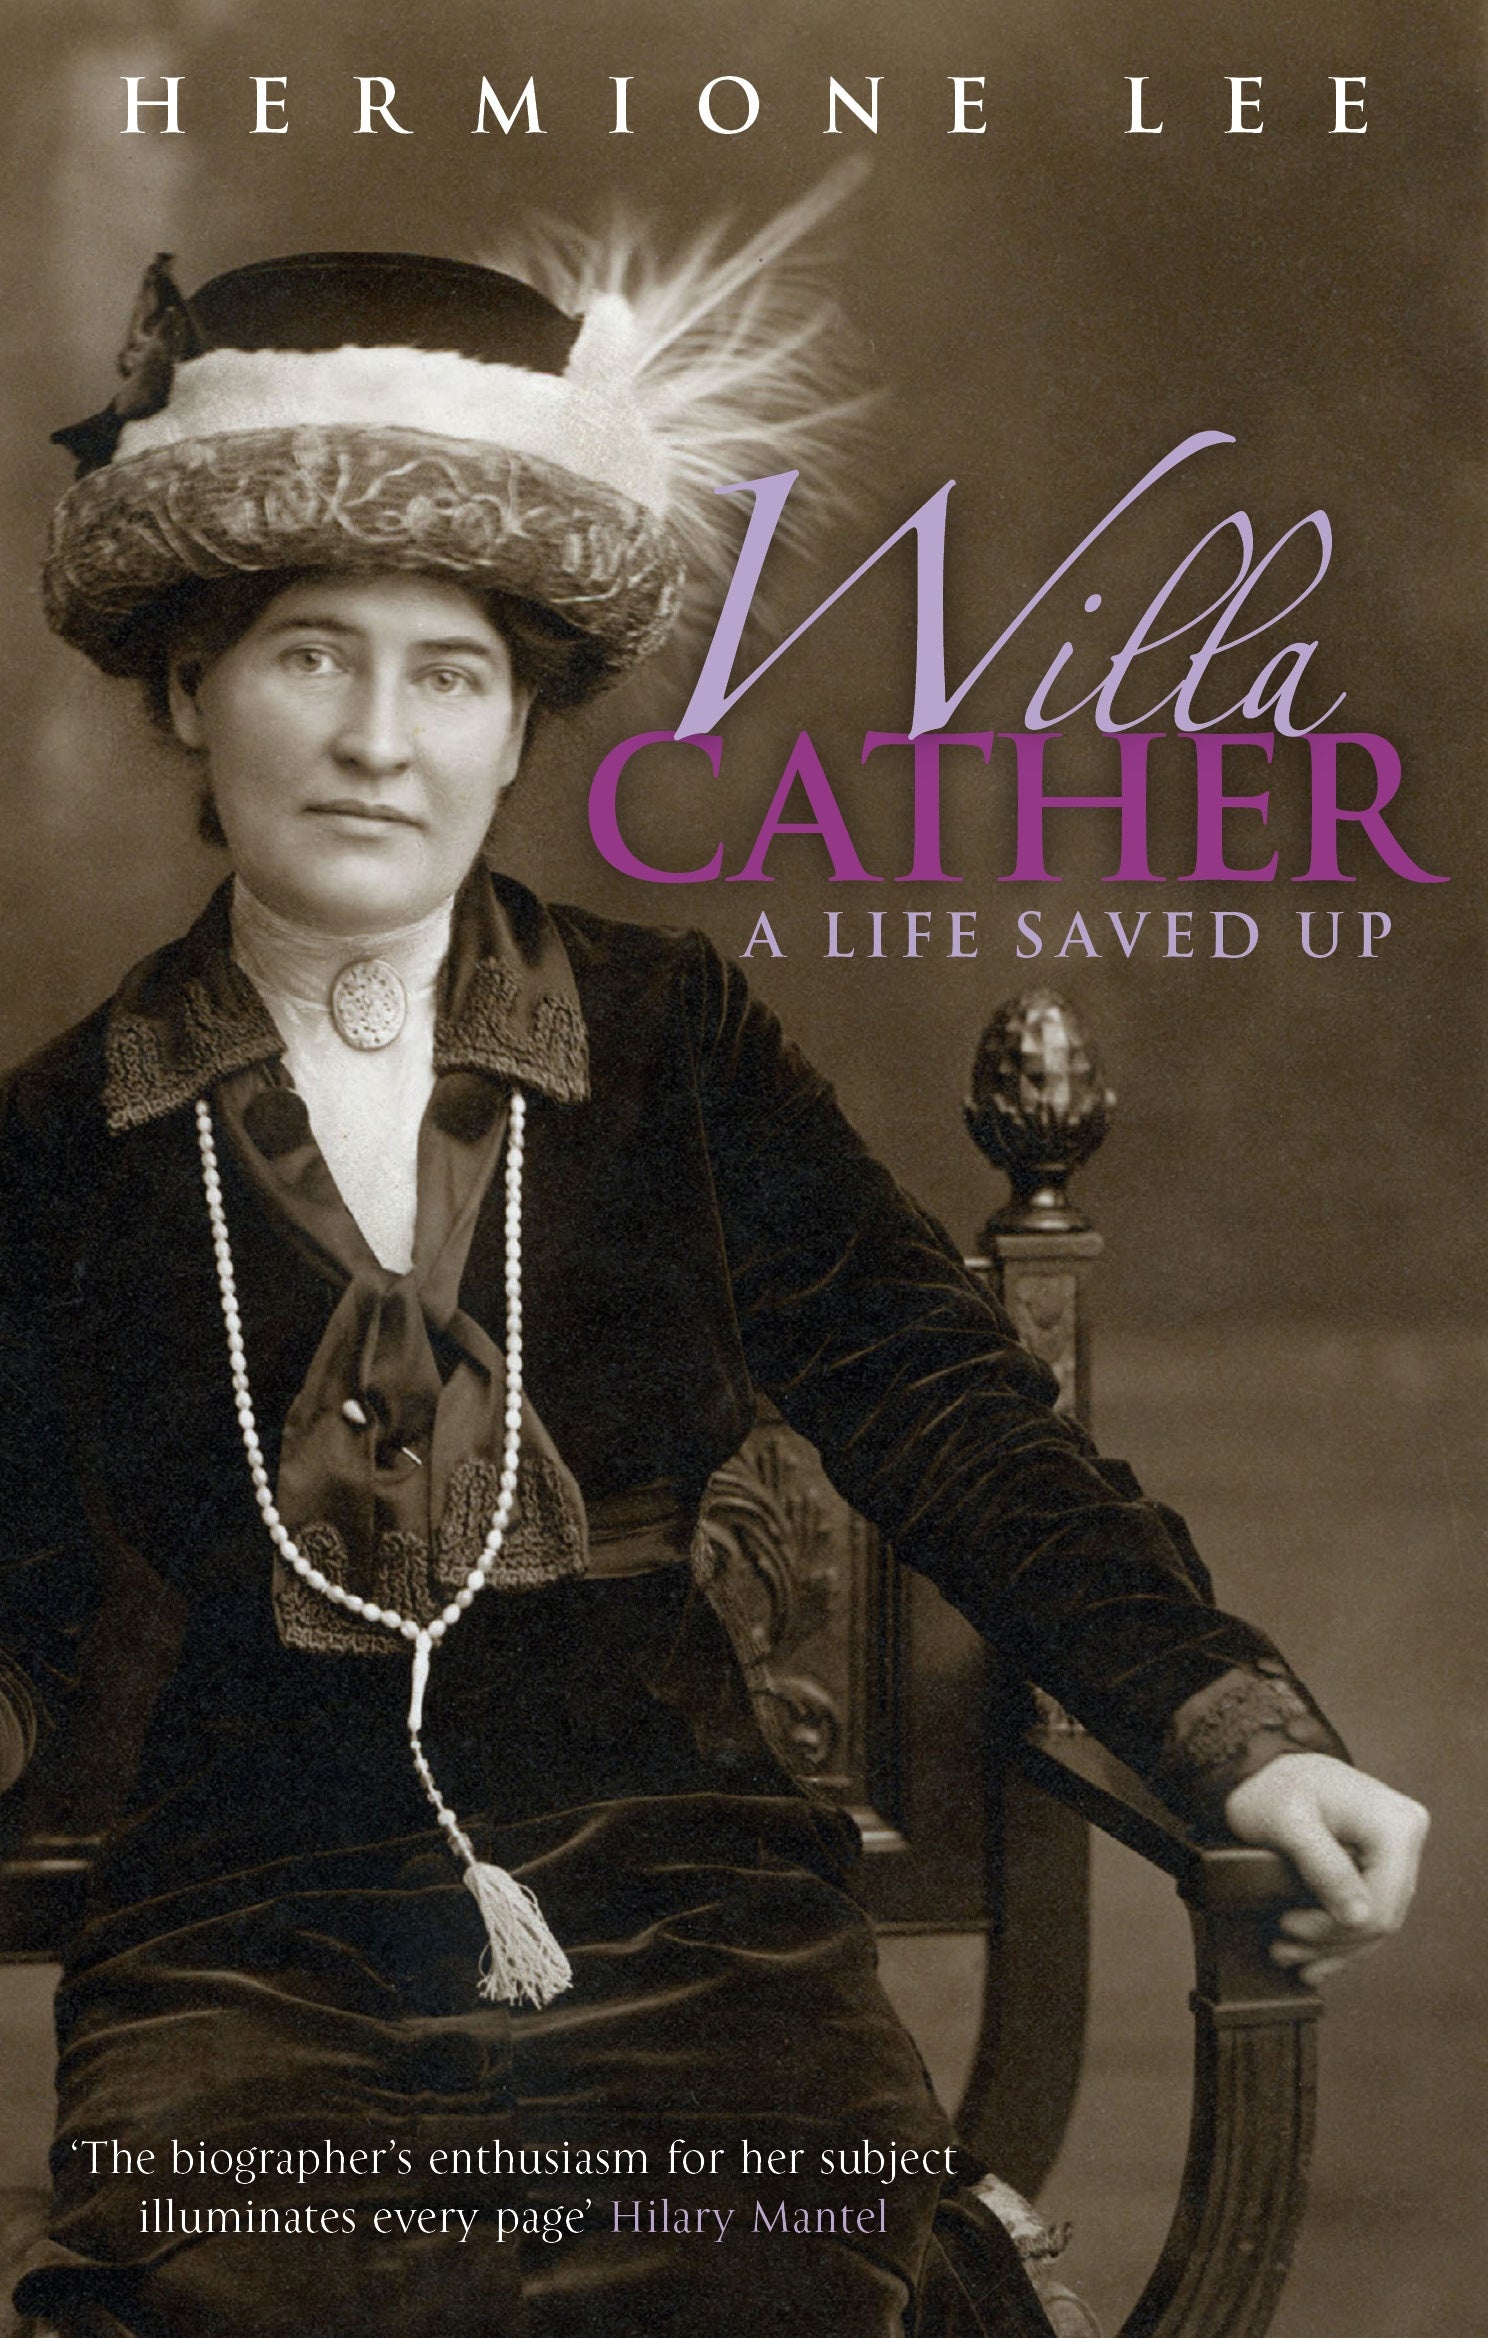 Willa Cather by Hermoine Lee